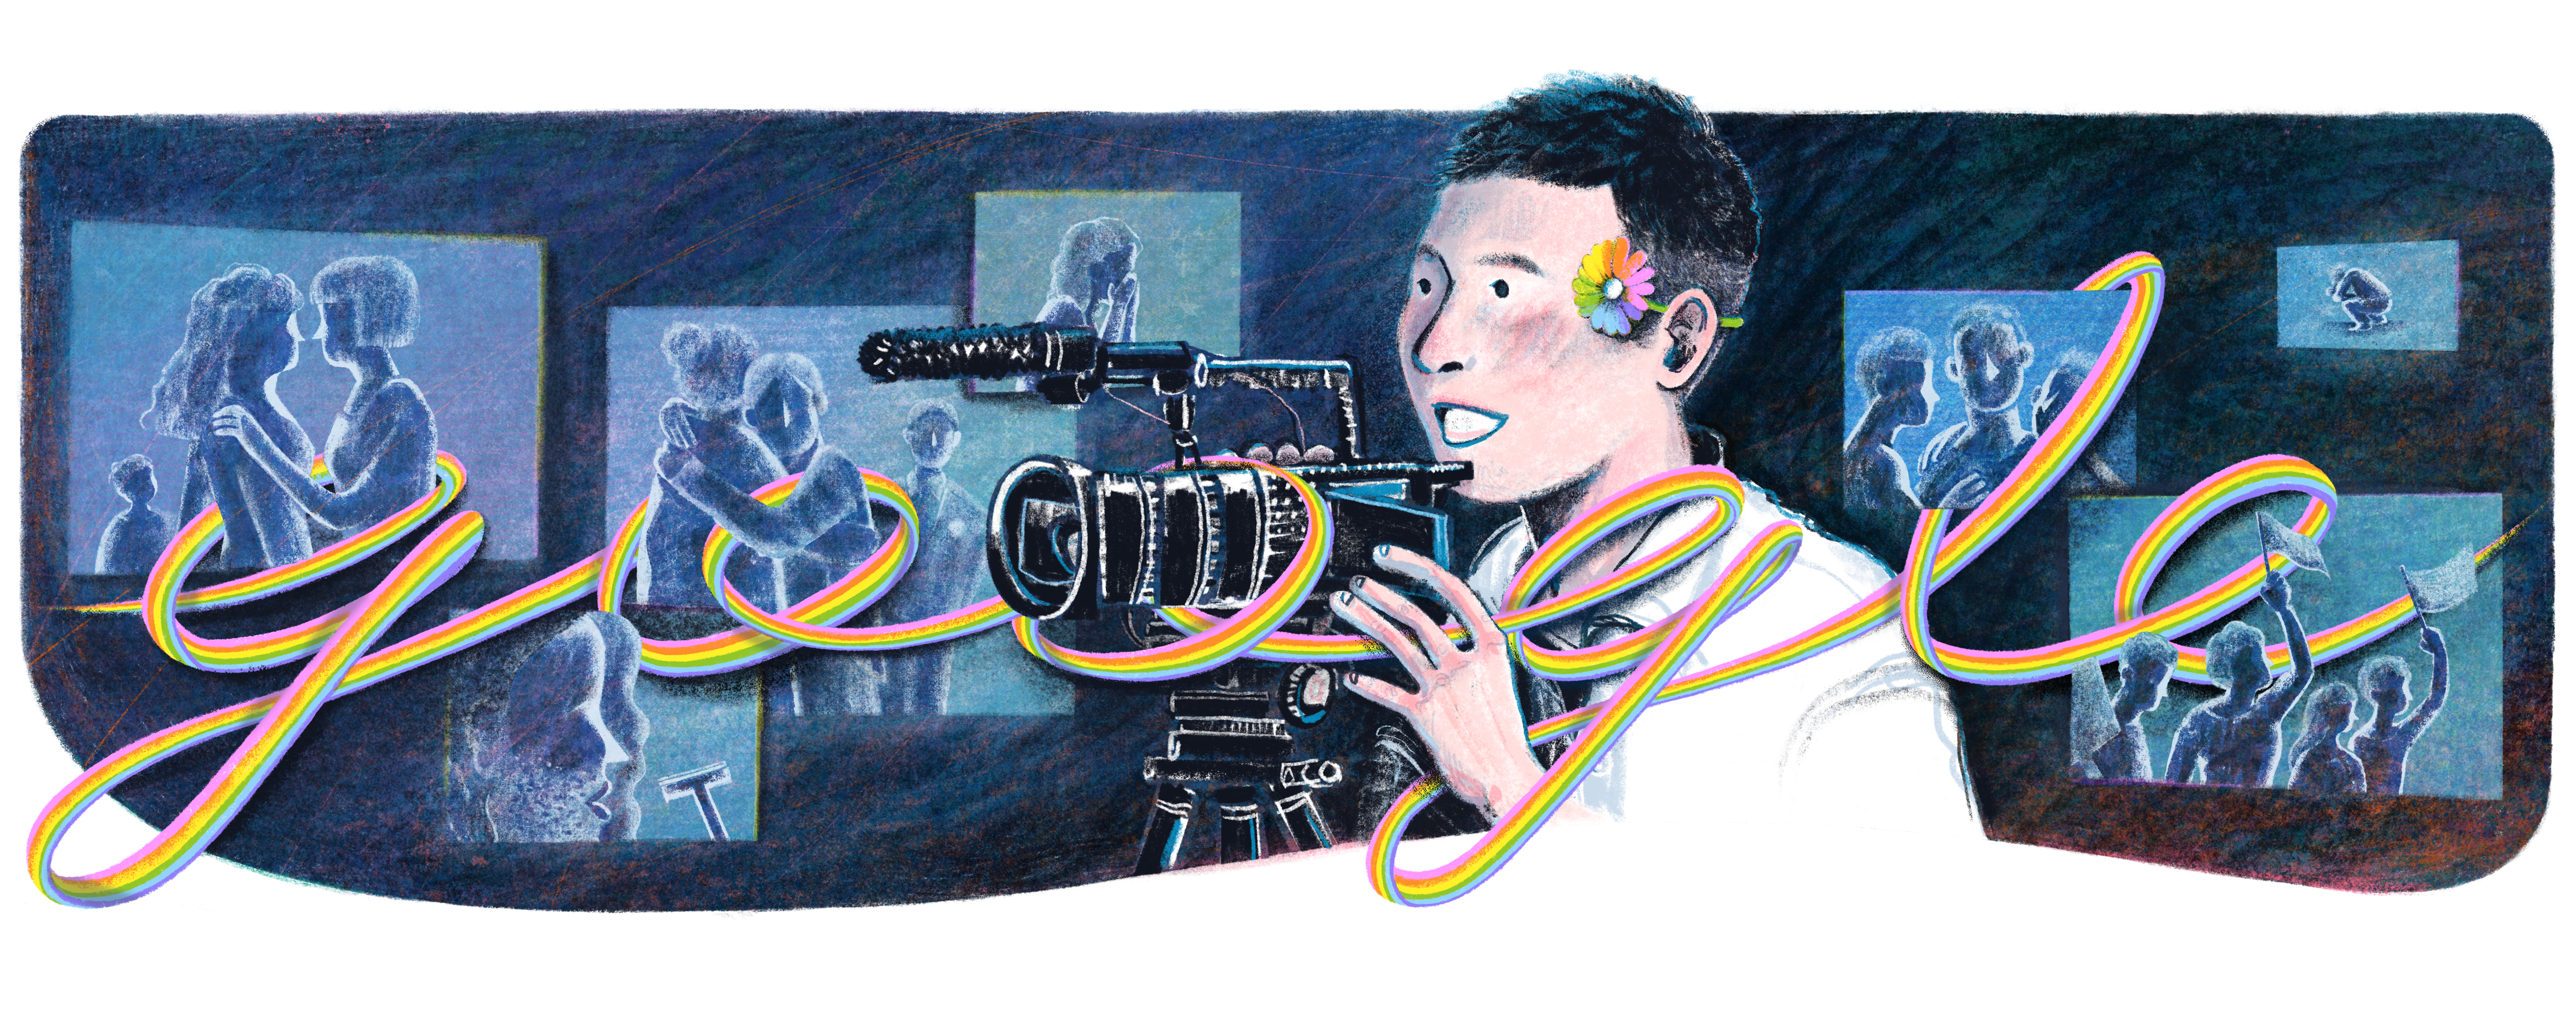 Illustration of Mickey Chen behind a camera on a stand. He has black, short hair, white skin, and has a colorful flower tucked behind his ear. The background shows multiple vignettes of people with the 